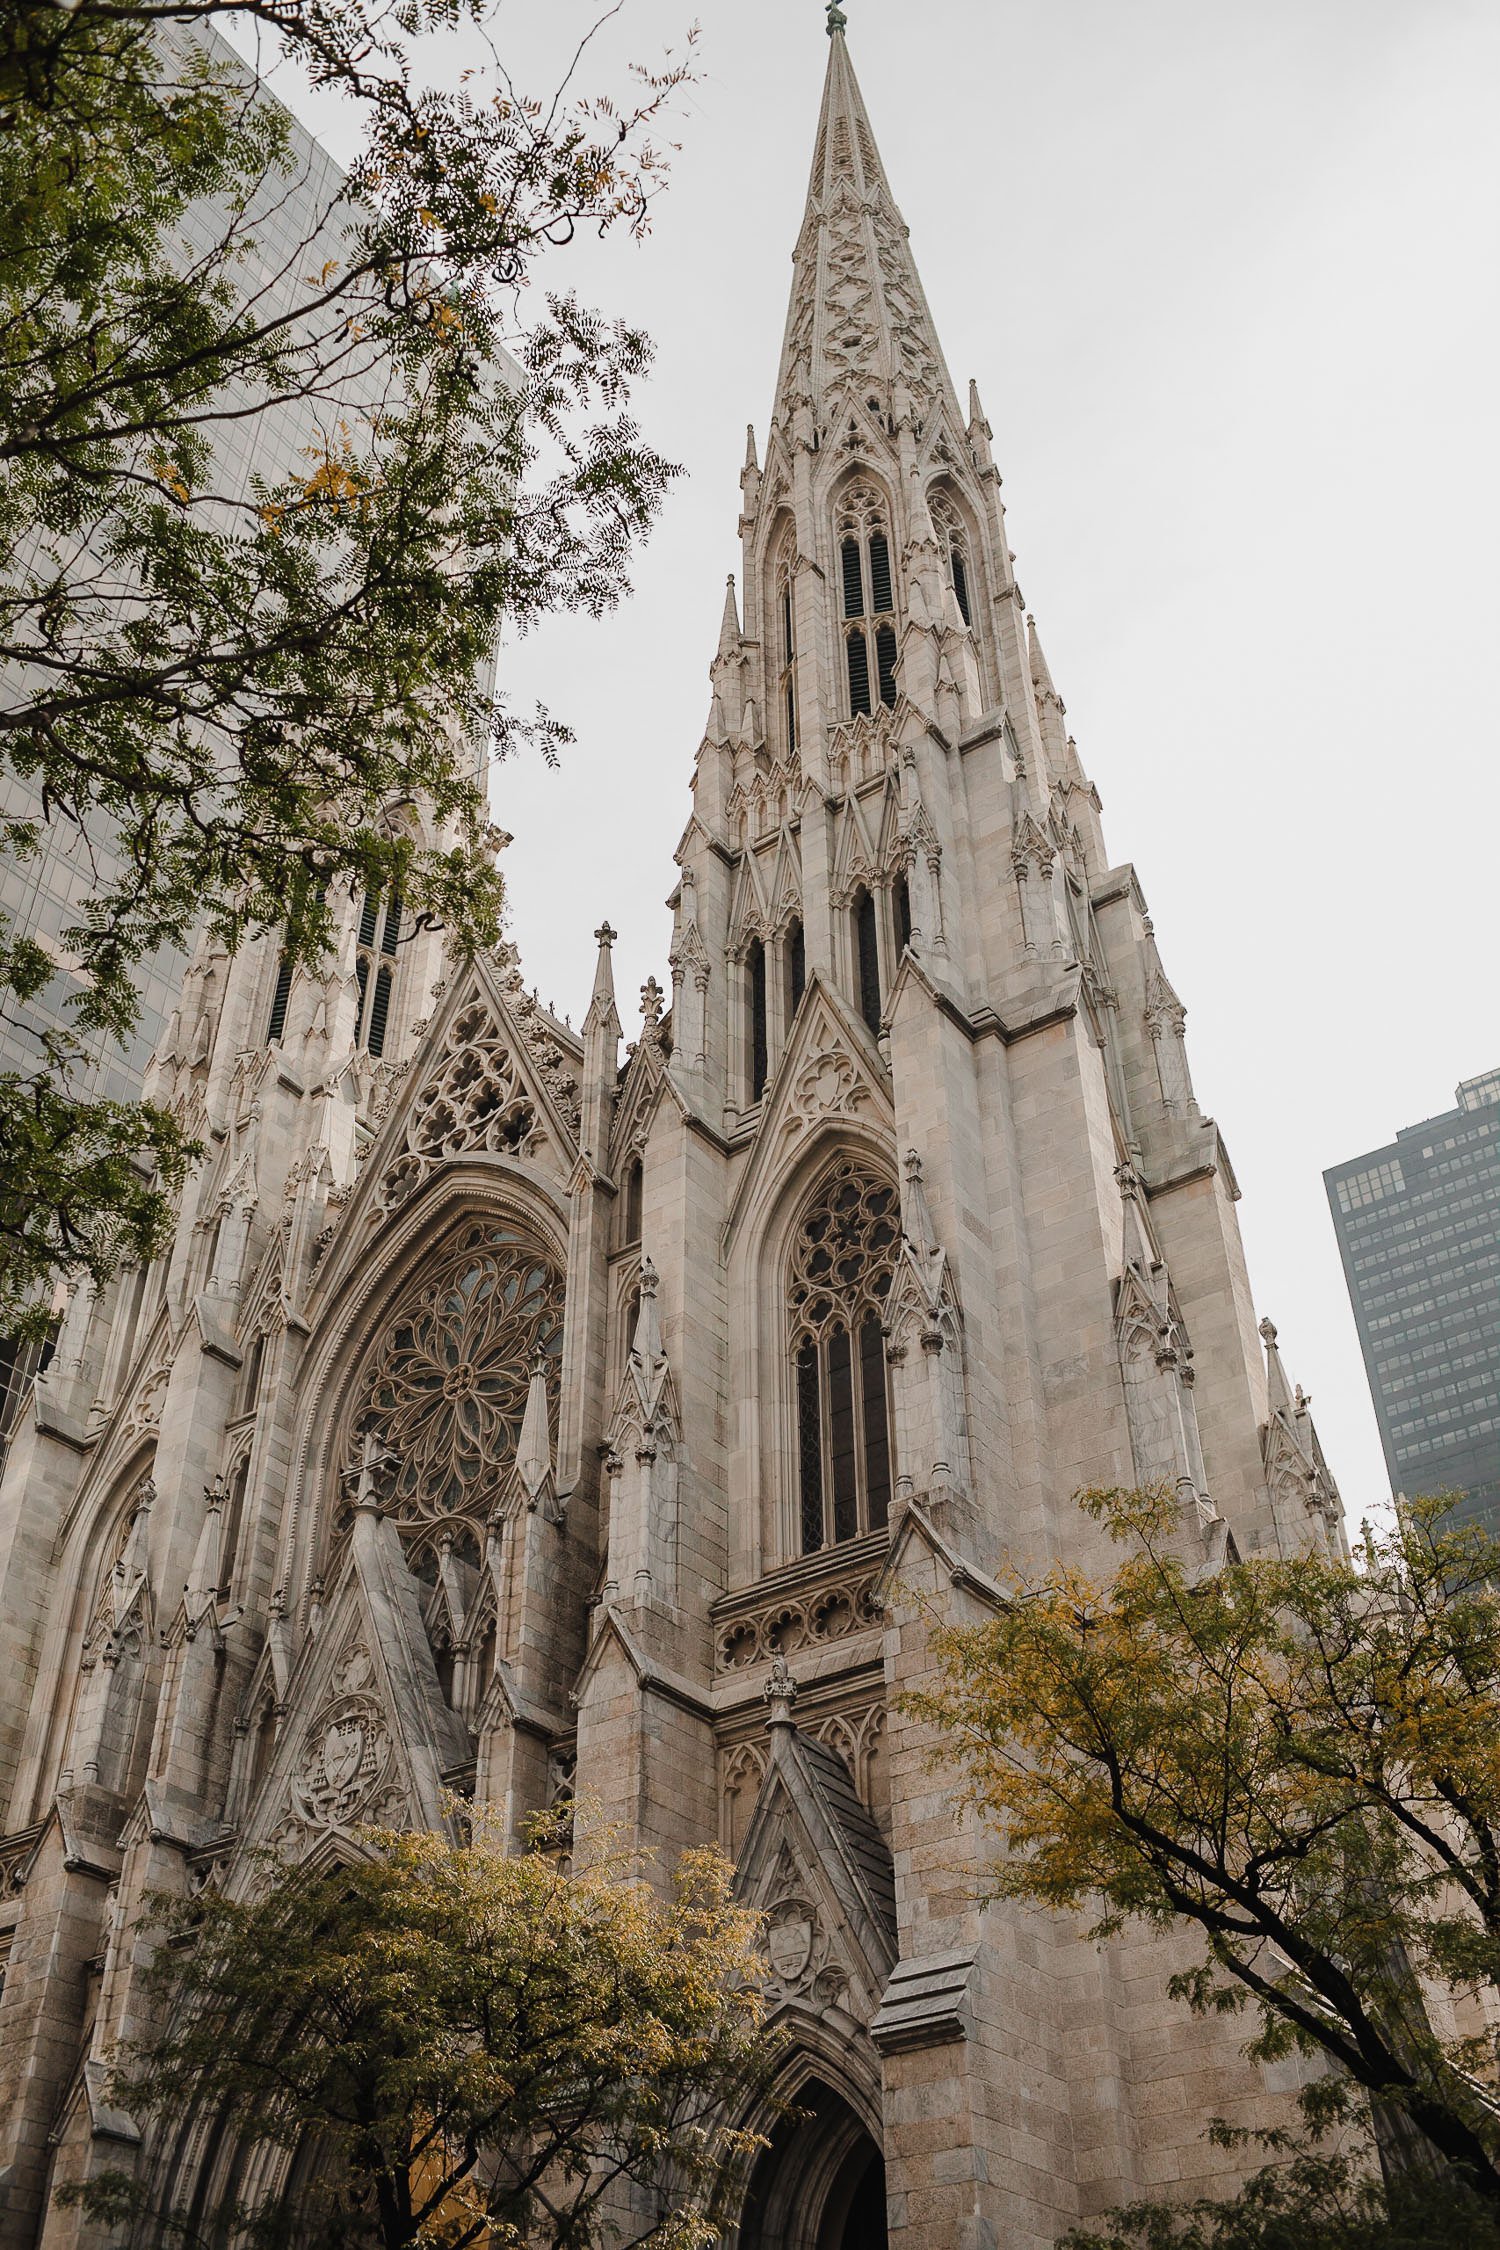 Classic New York Wedding at St. Patrick's Cathedral